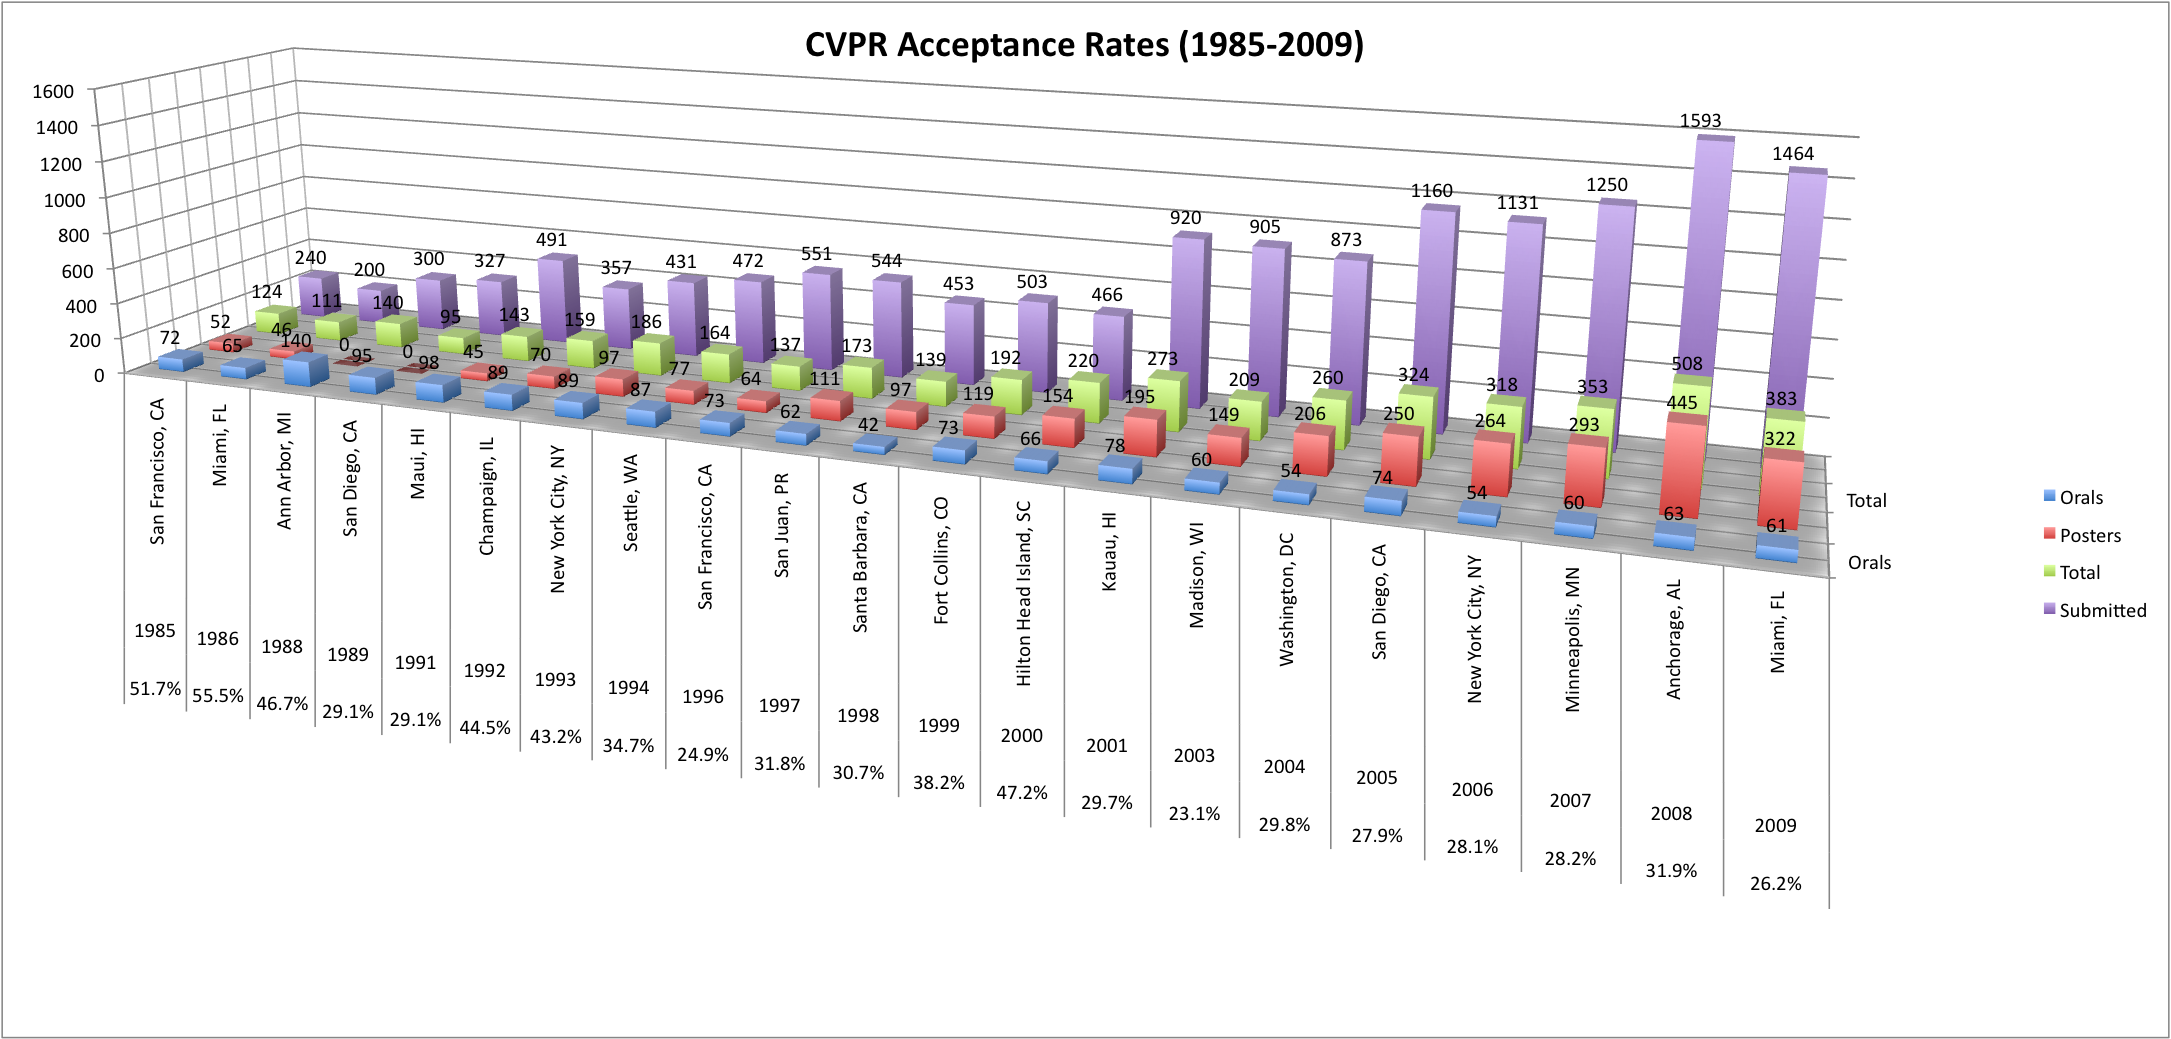 CVPR Acceptance Rates from 1985 to 2009